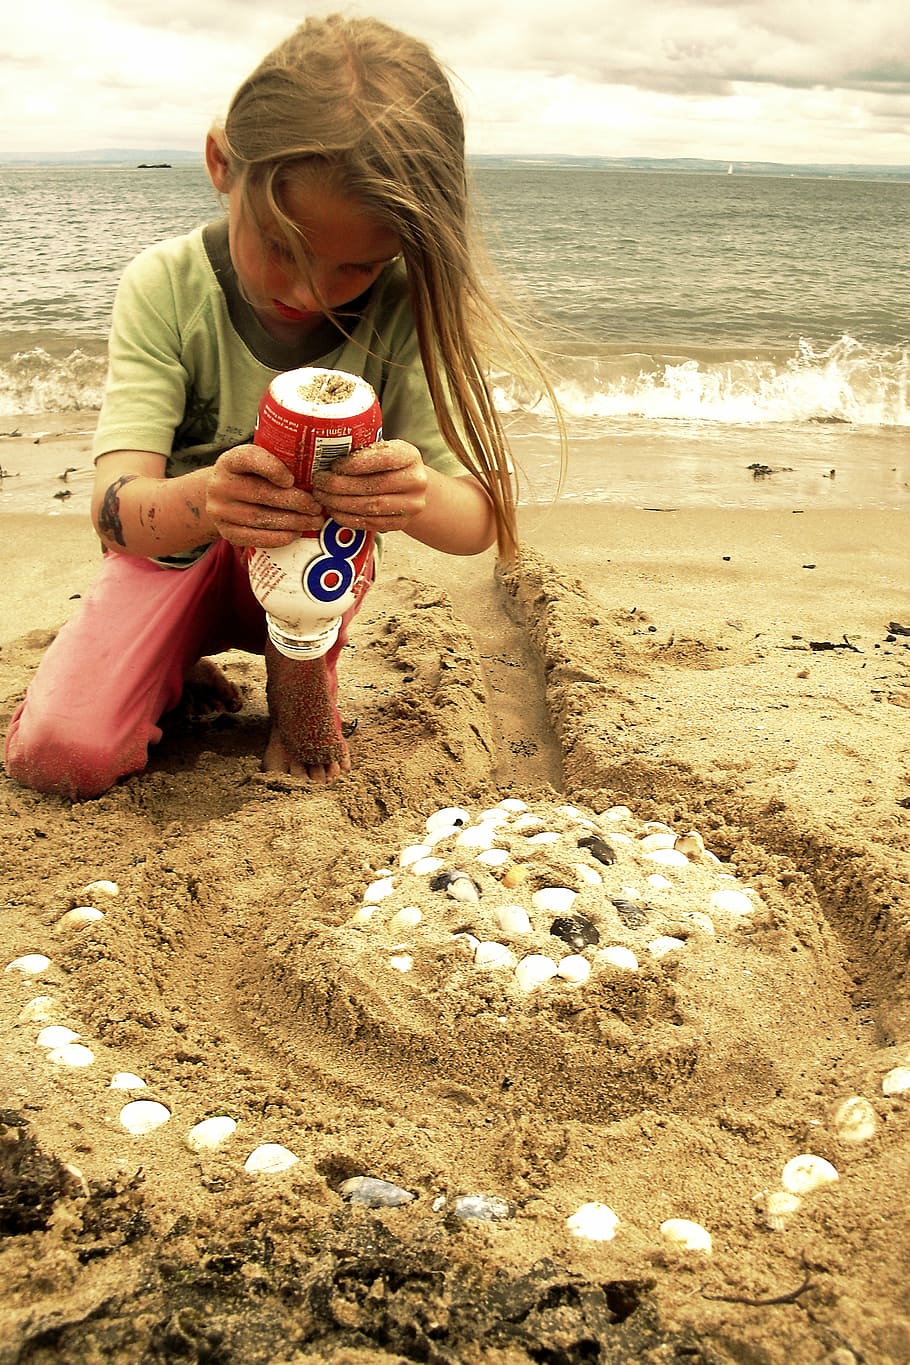 beach, sand castle, shells, child, playing, fun, play, childhood, kid, outdoor